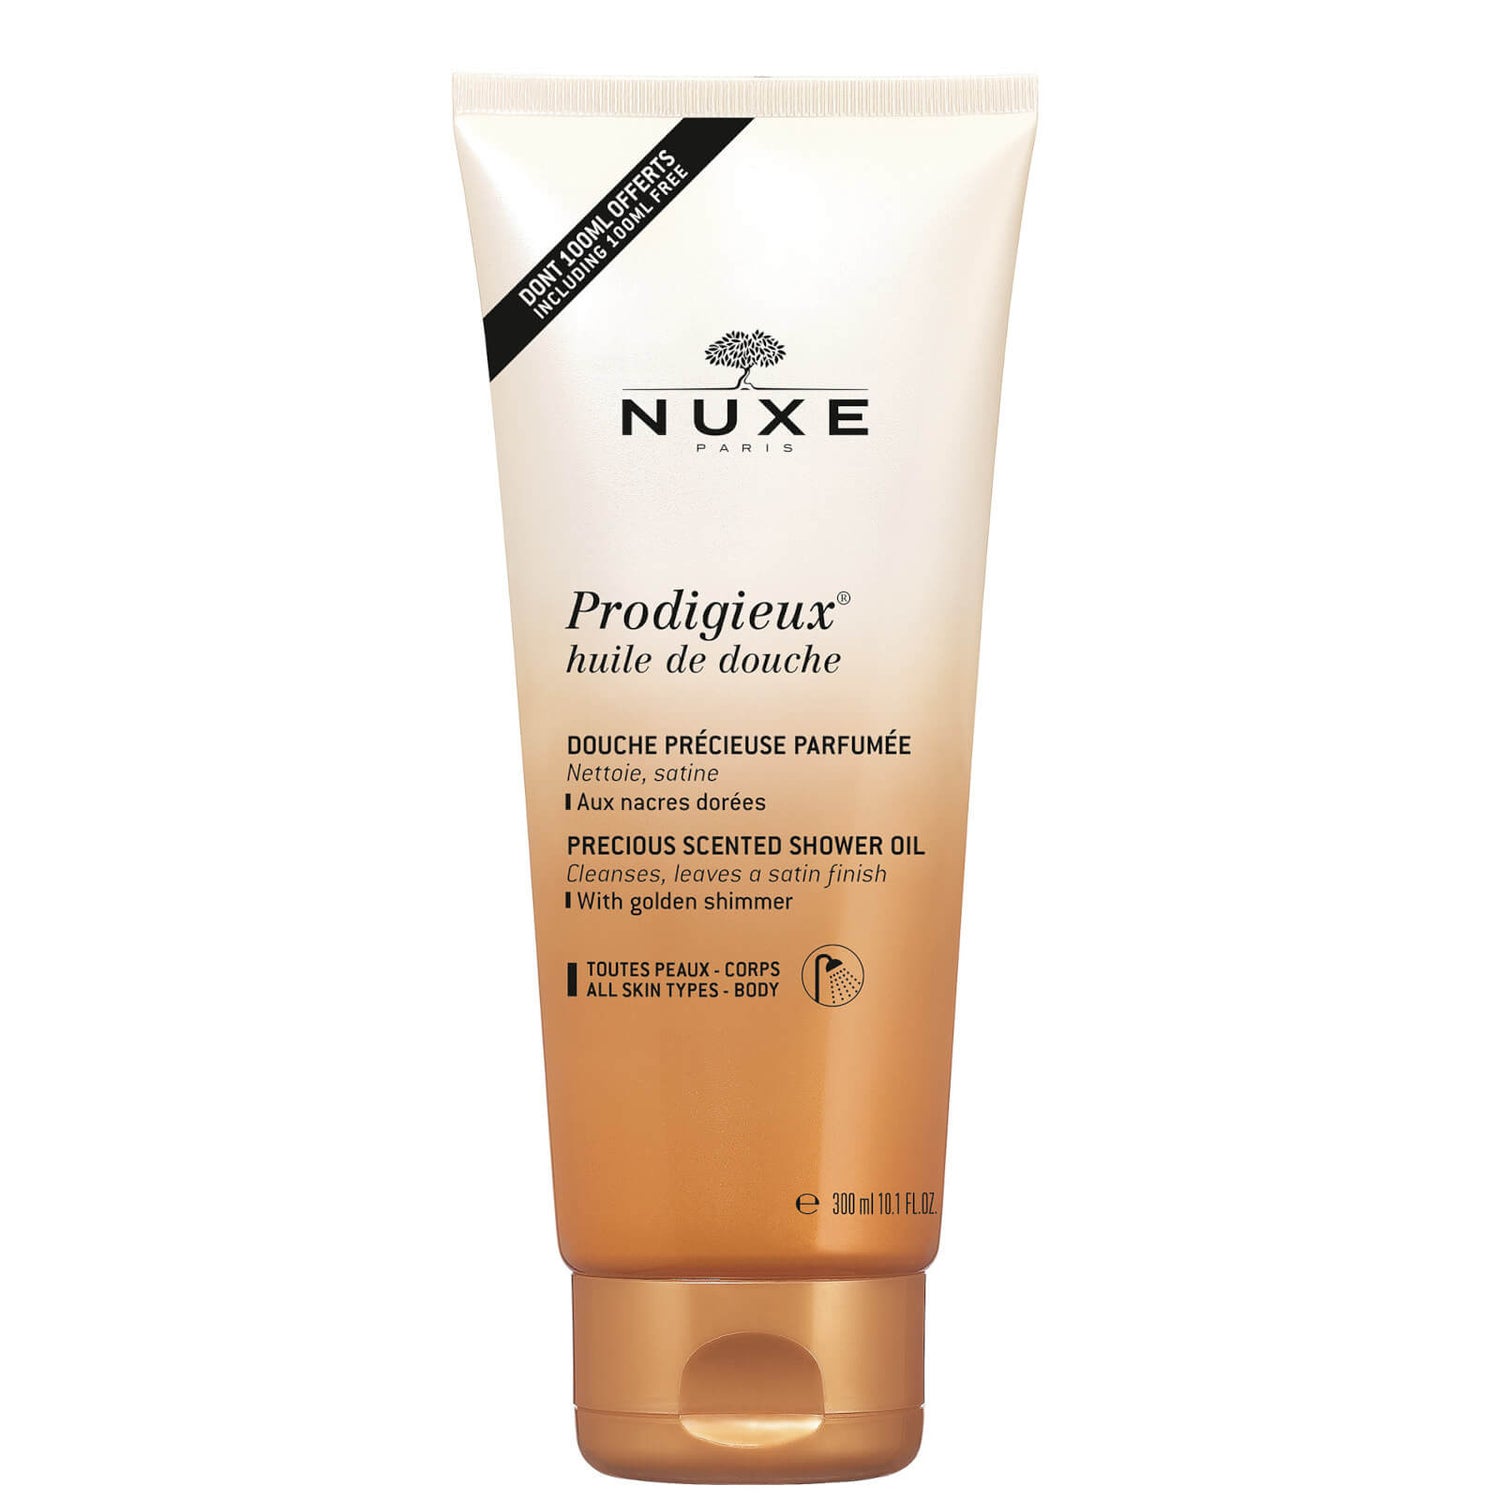 NUXE Prodigieux Beautifying Scented Body Lotion 300ml